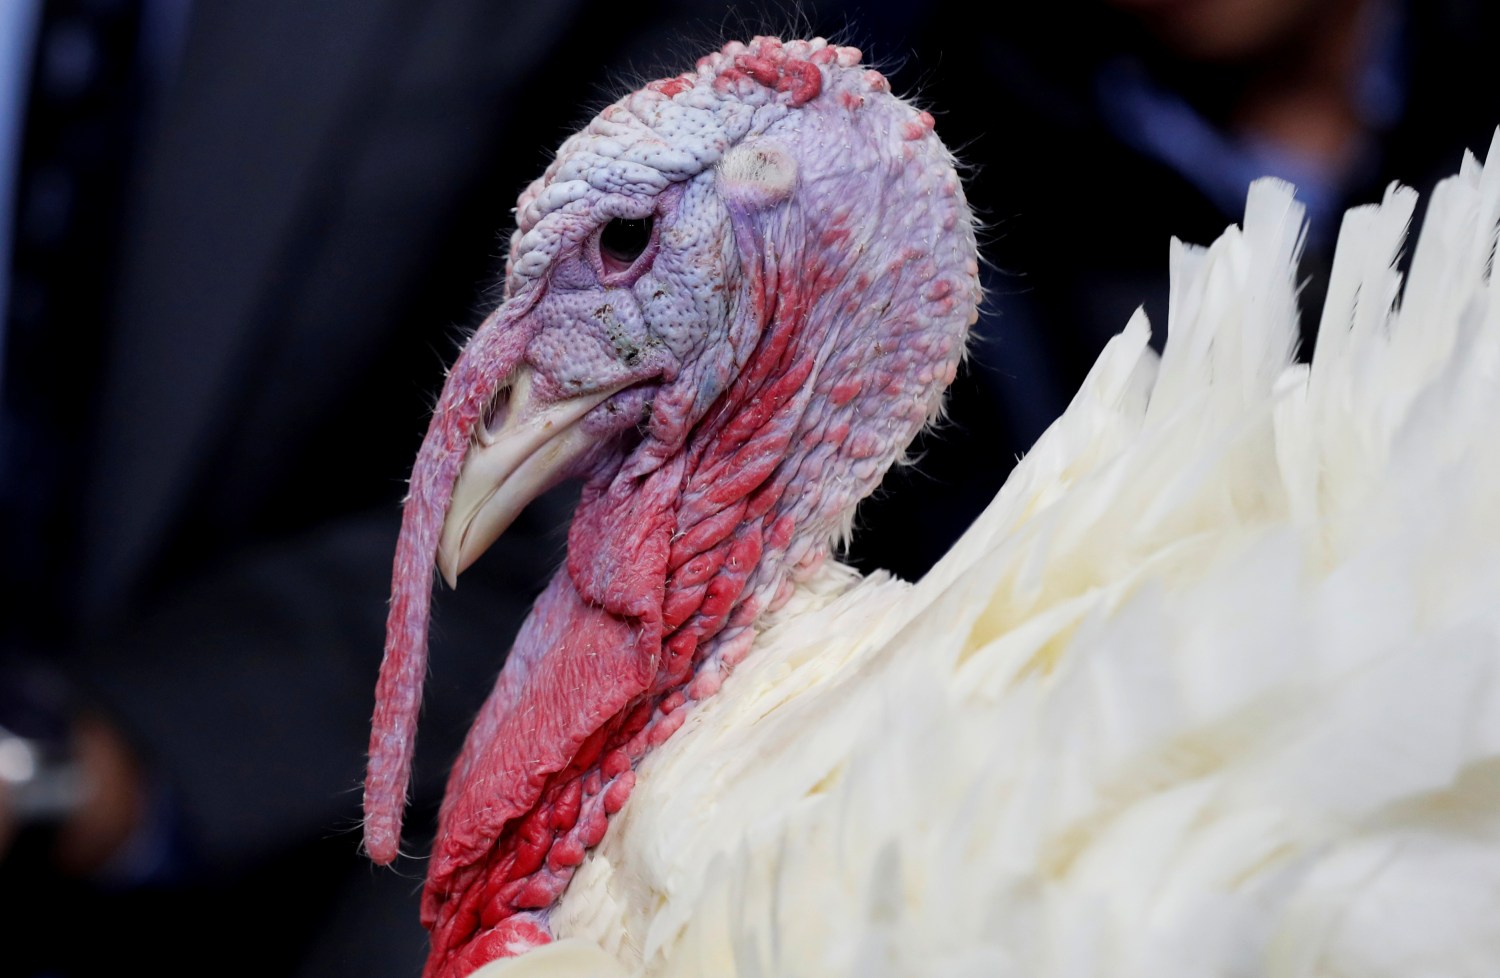 One of the National Thanksgiving Turkeys is presented to members of the press in the Briefing Room before U.S. President Donald Trump participates in the 71st national turkey pardoning at the White House in Washington, U.S., November 20, 2018. REUTERS/Leah Millis - RC1E2B96F400